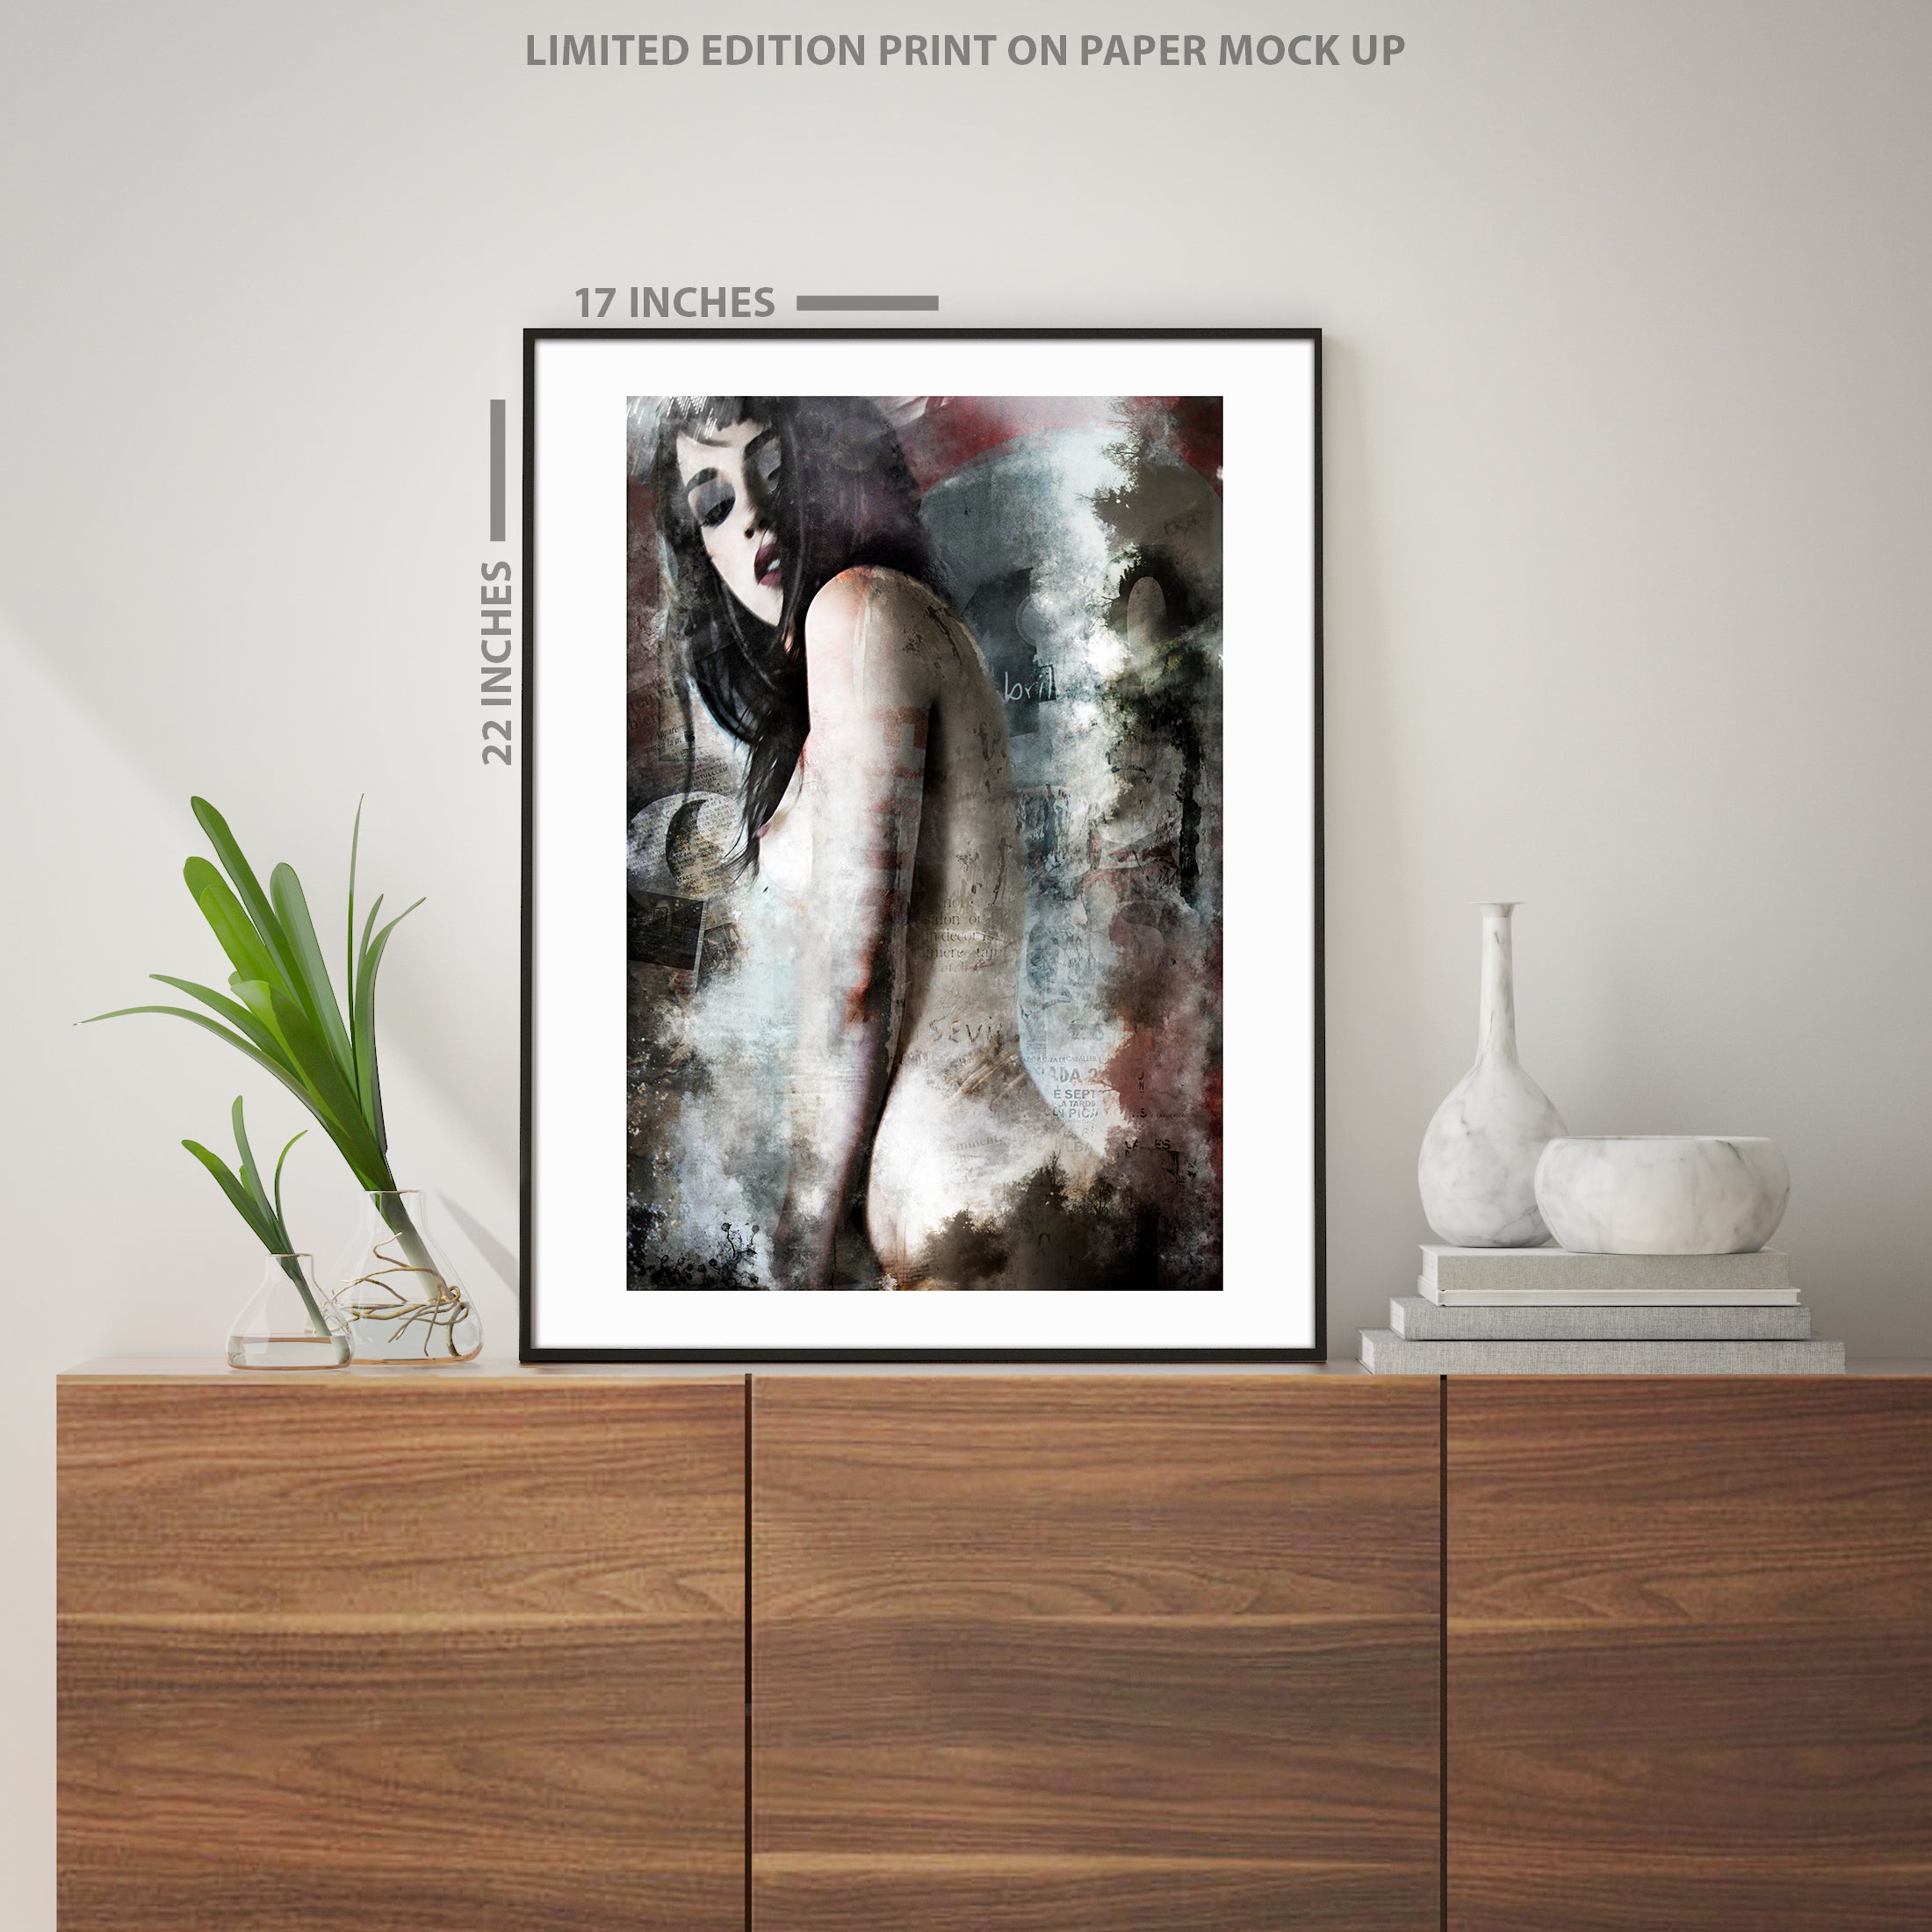 Nude 4.0, Limited Edition Print